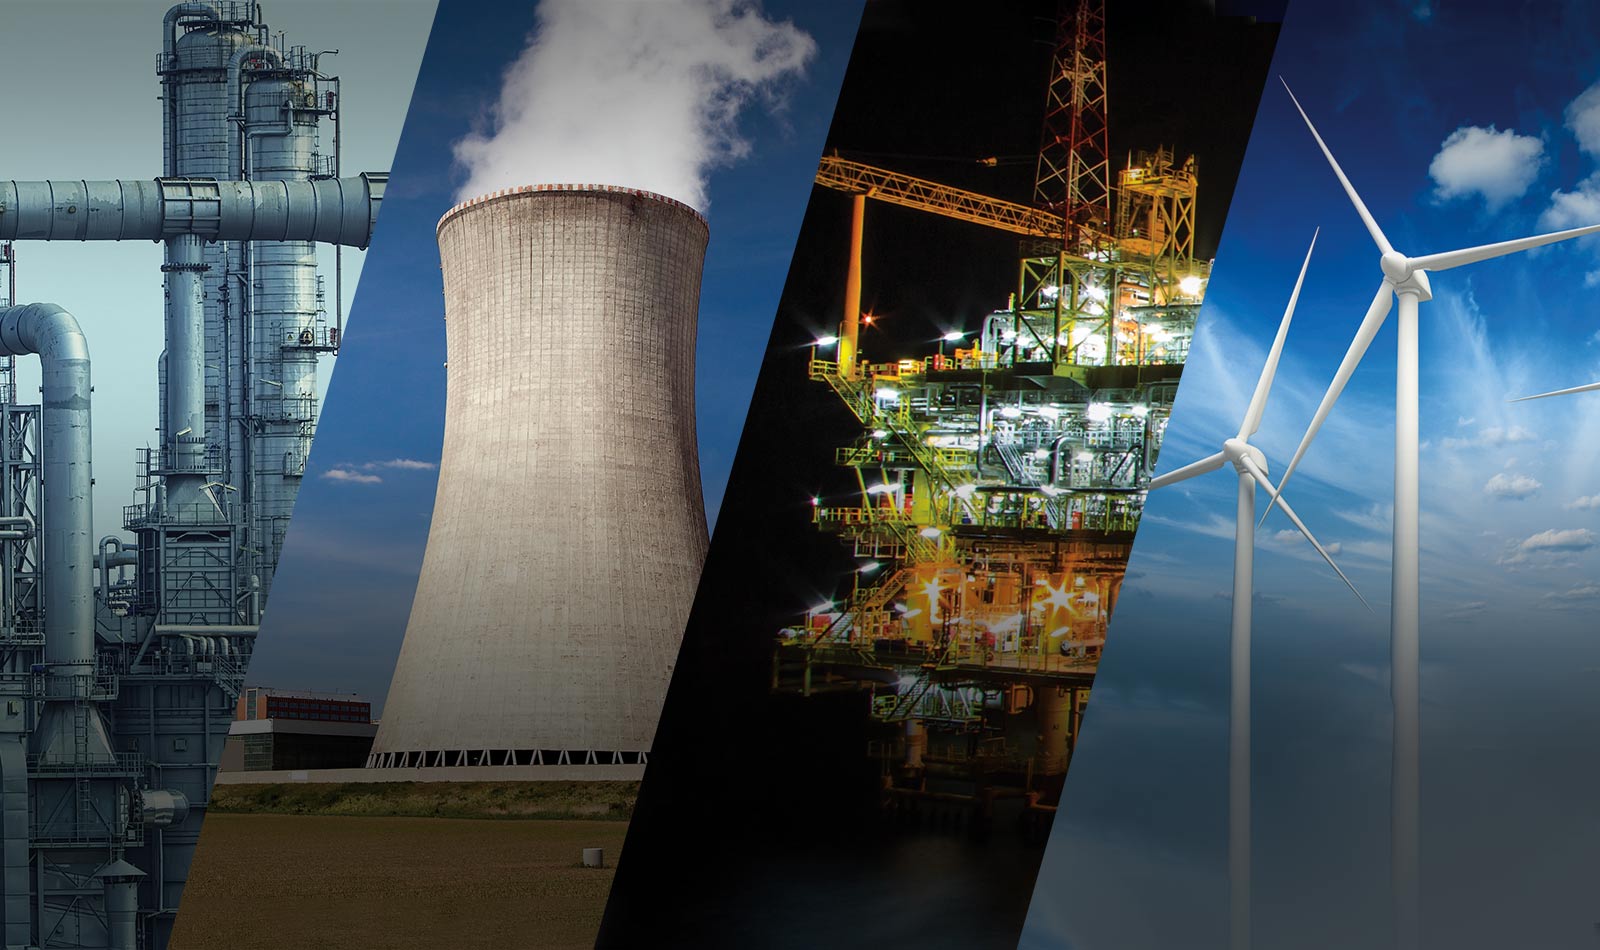 A collage of industries served by Hayward Tyler: Power, Nuclear, Oil & Gas, and Renewables.